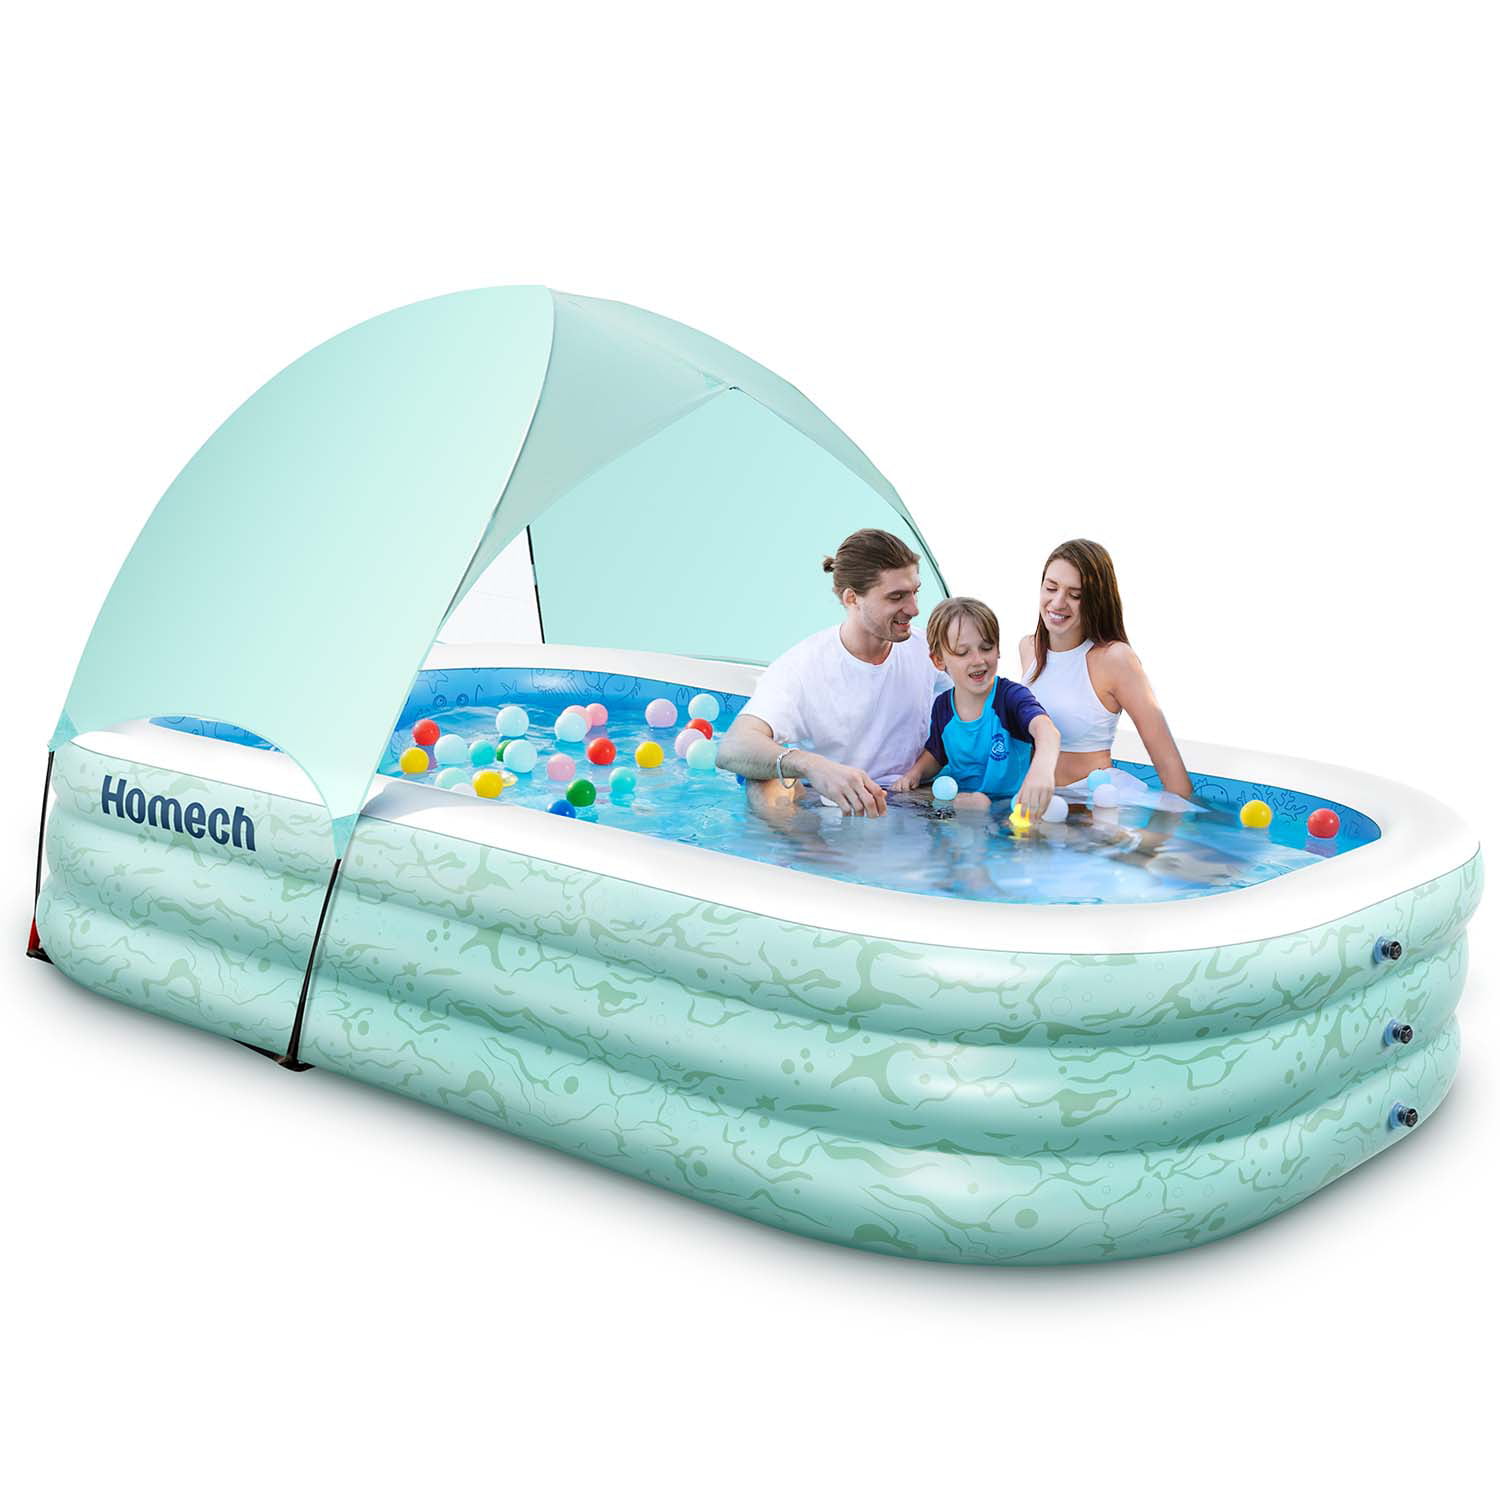 Inflatable pools: A haven for families during summer vacations